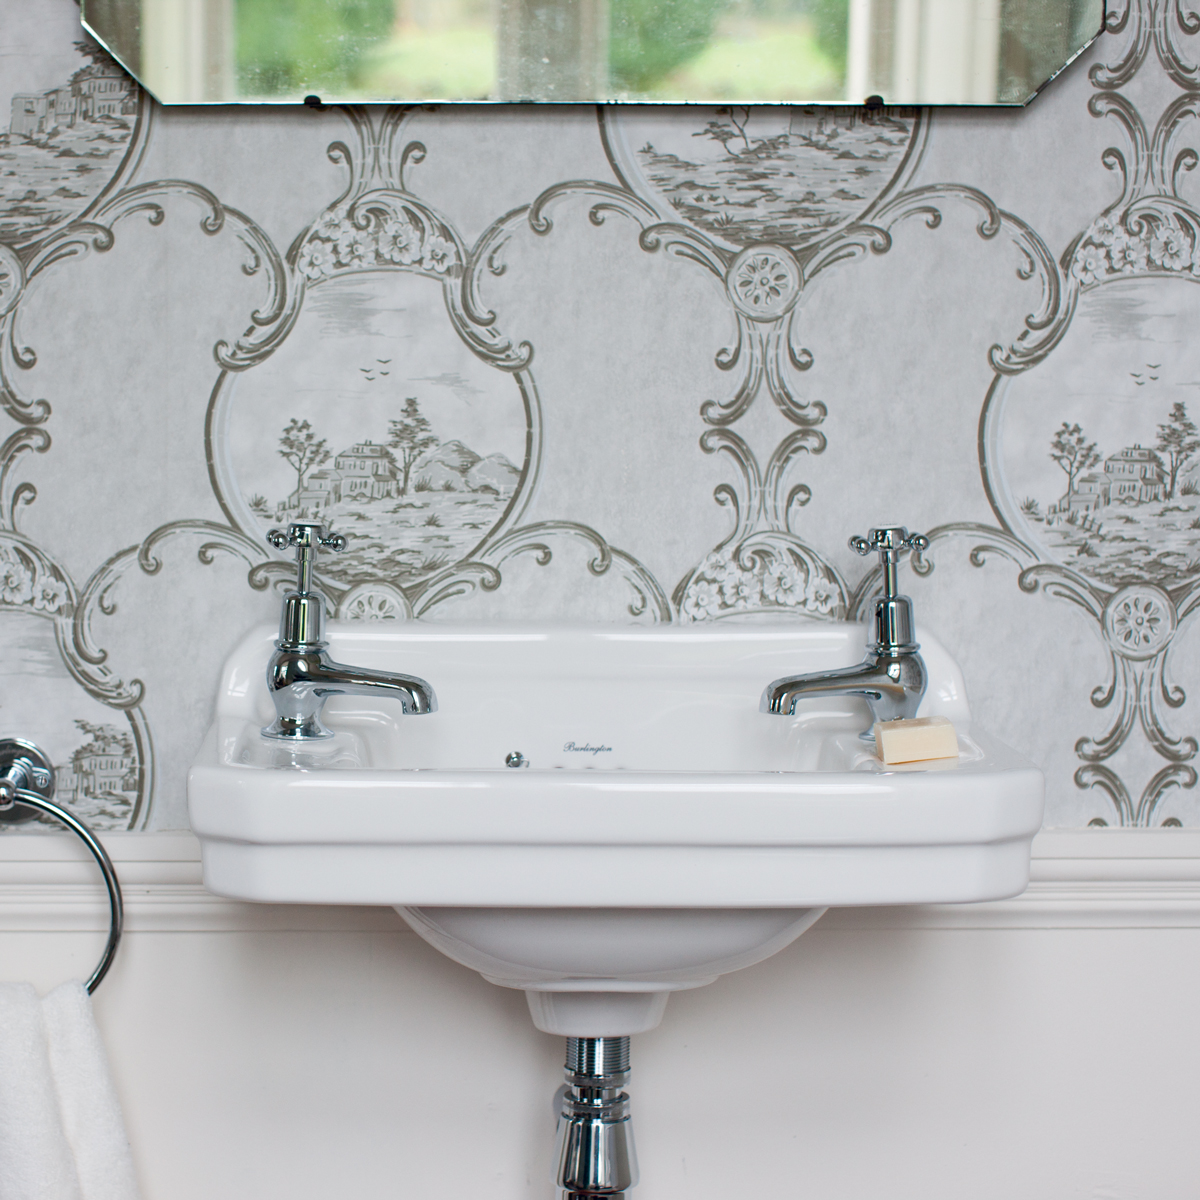 Edwardian Cloakroom Basin in a traditional white 